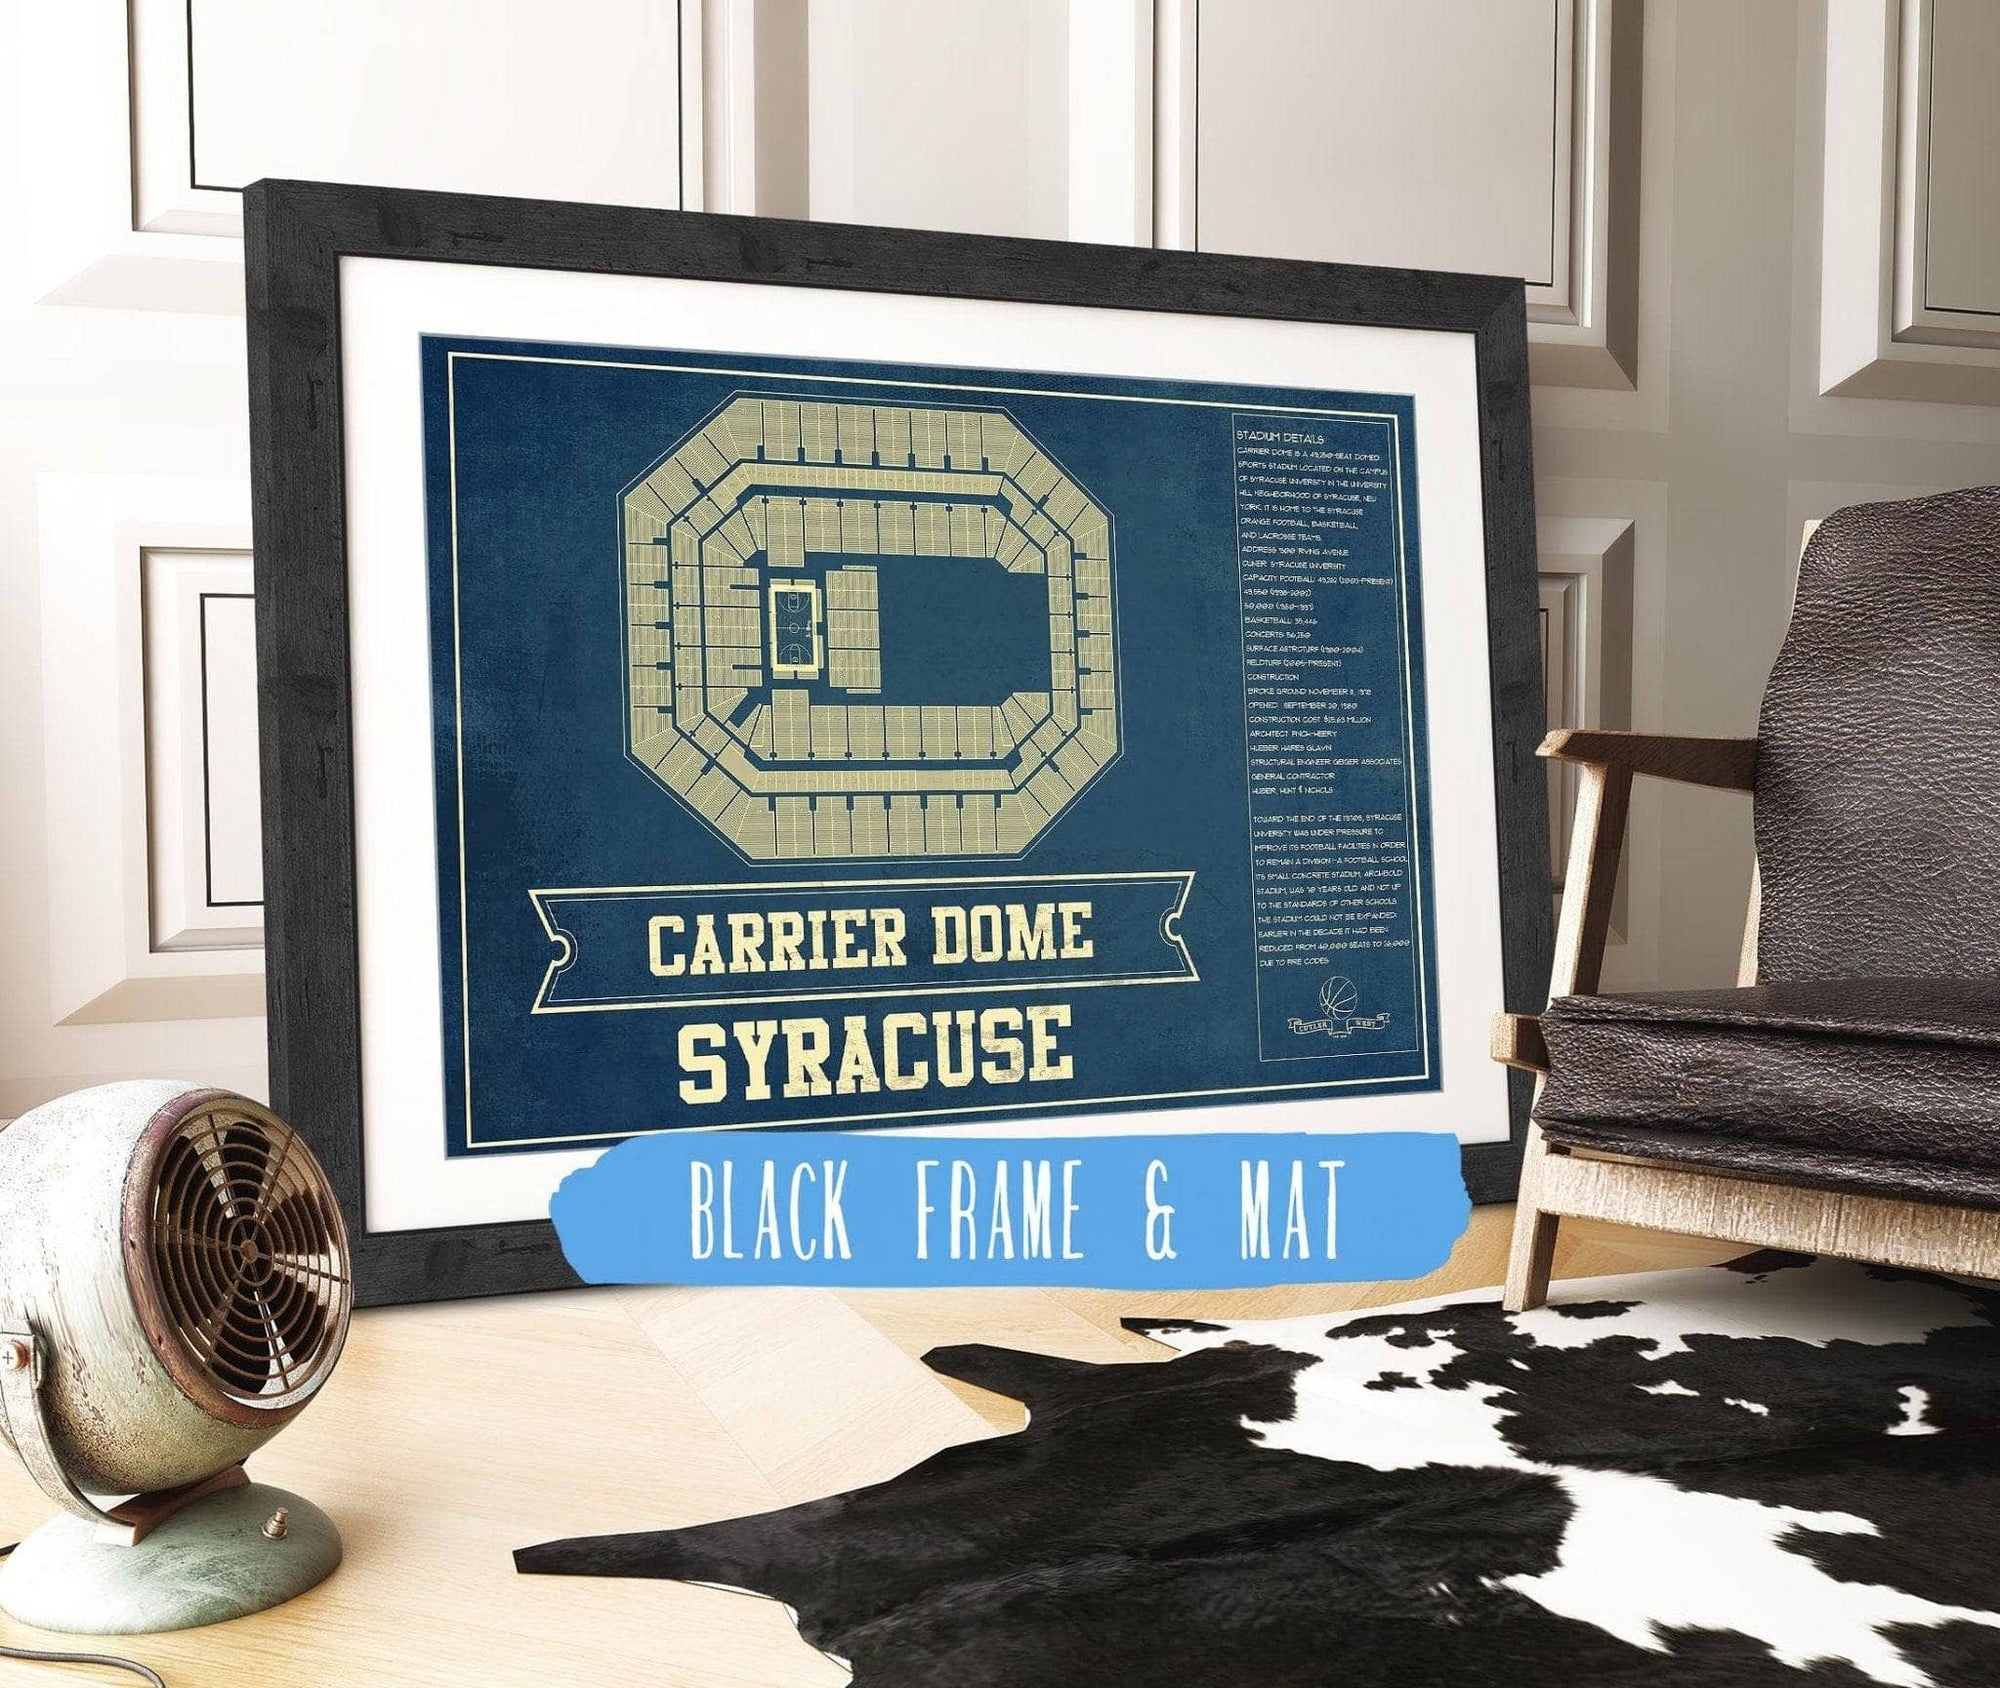 Cutler West Basketball Collection 14" x 11" / Black Frame & Mat Syracuse Orange - Carrier Dome Seating Chart - College Basketball Blueprint Art 675915943_82108